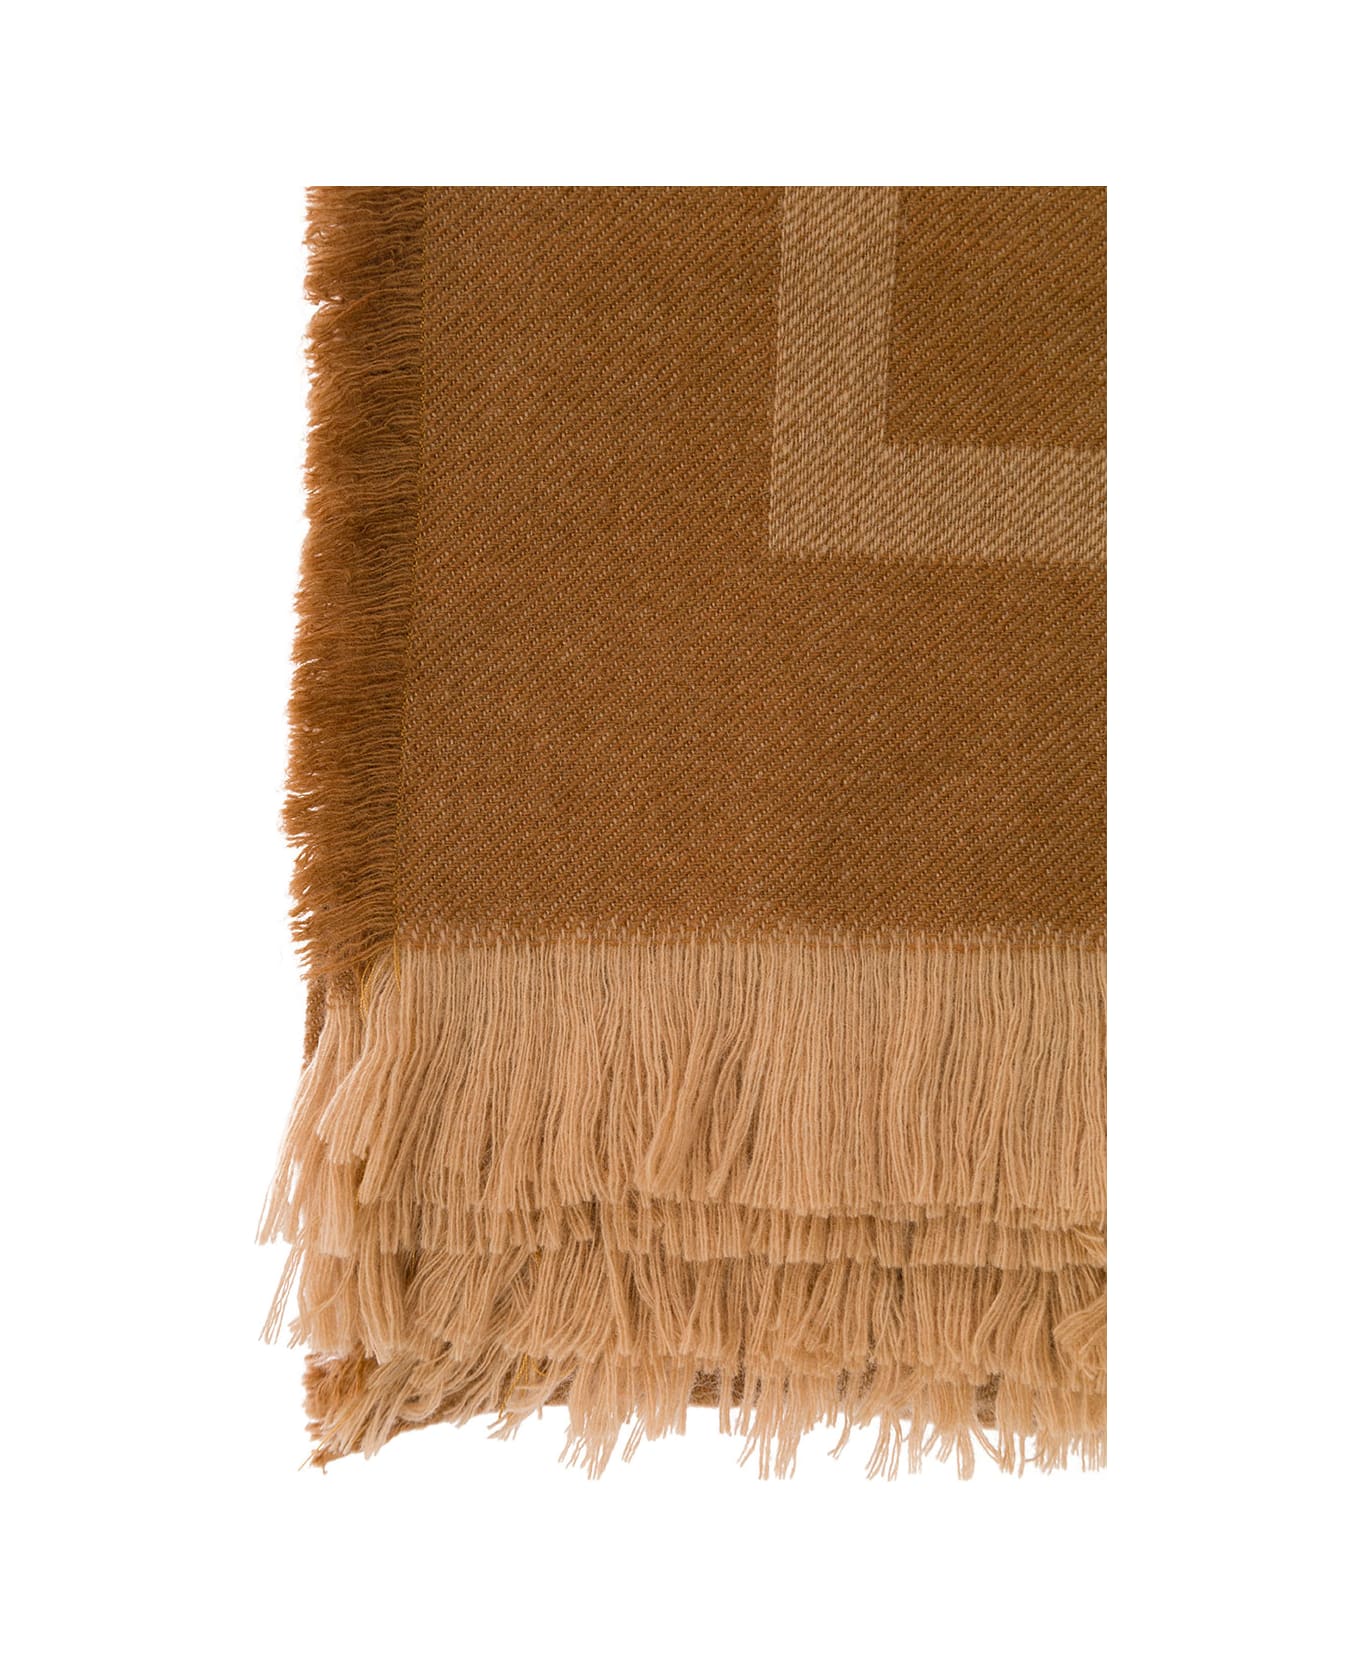 Totême Beige Scarf With Monogram Print In Wool And Cashmere Woman - Beige スカーフ＆ストール